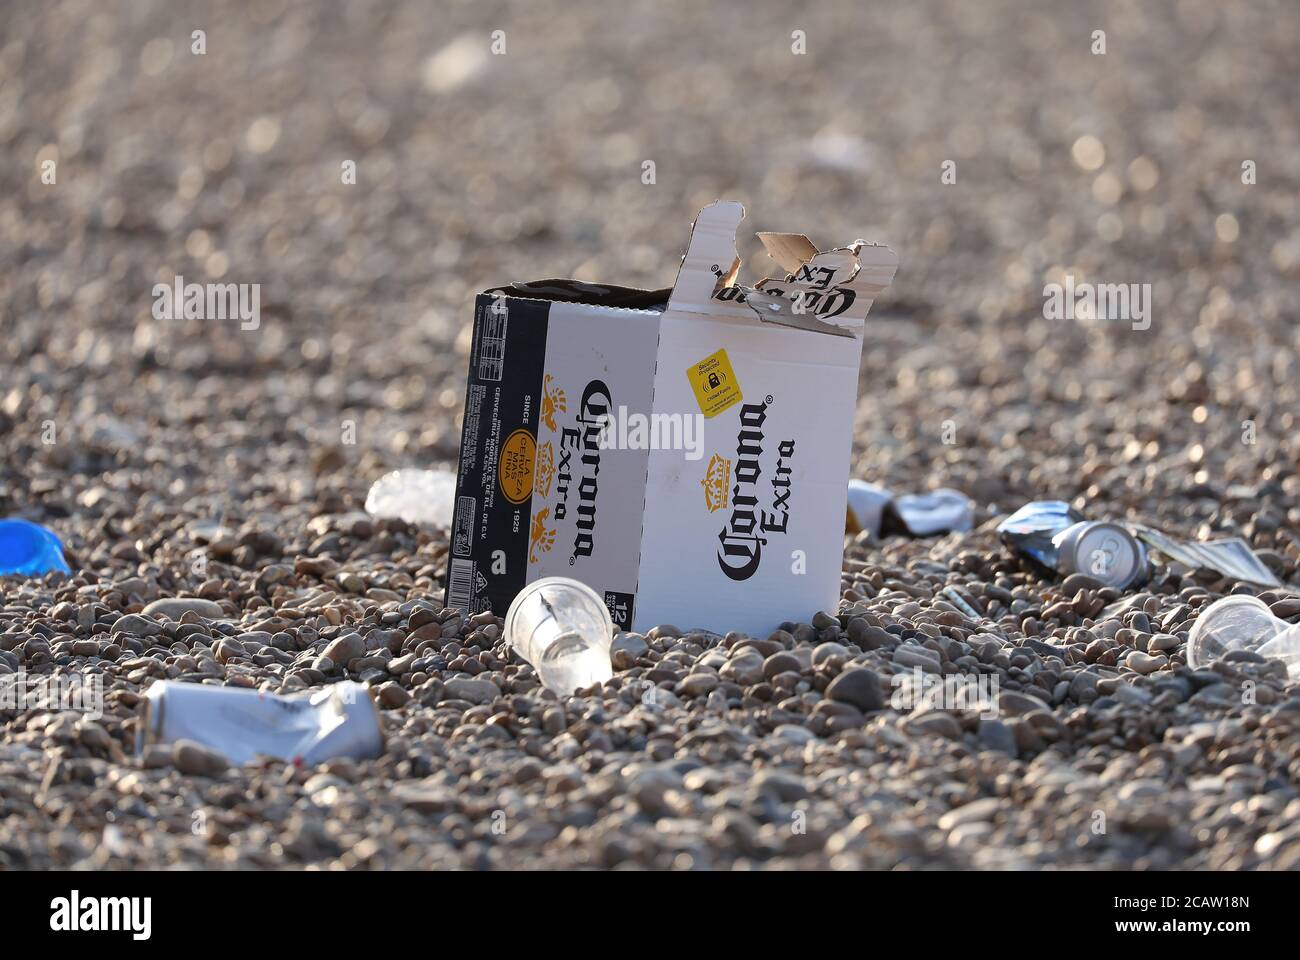 Brighton, UK. 09th Aug, 2020. Vast amounts of litter are strewn across Brighton seafront and beach after a busy day at the resort yesterday. Credit: James Boardman/Alamy Live News Stock Photo